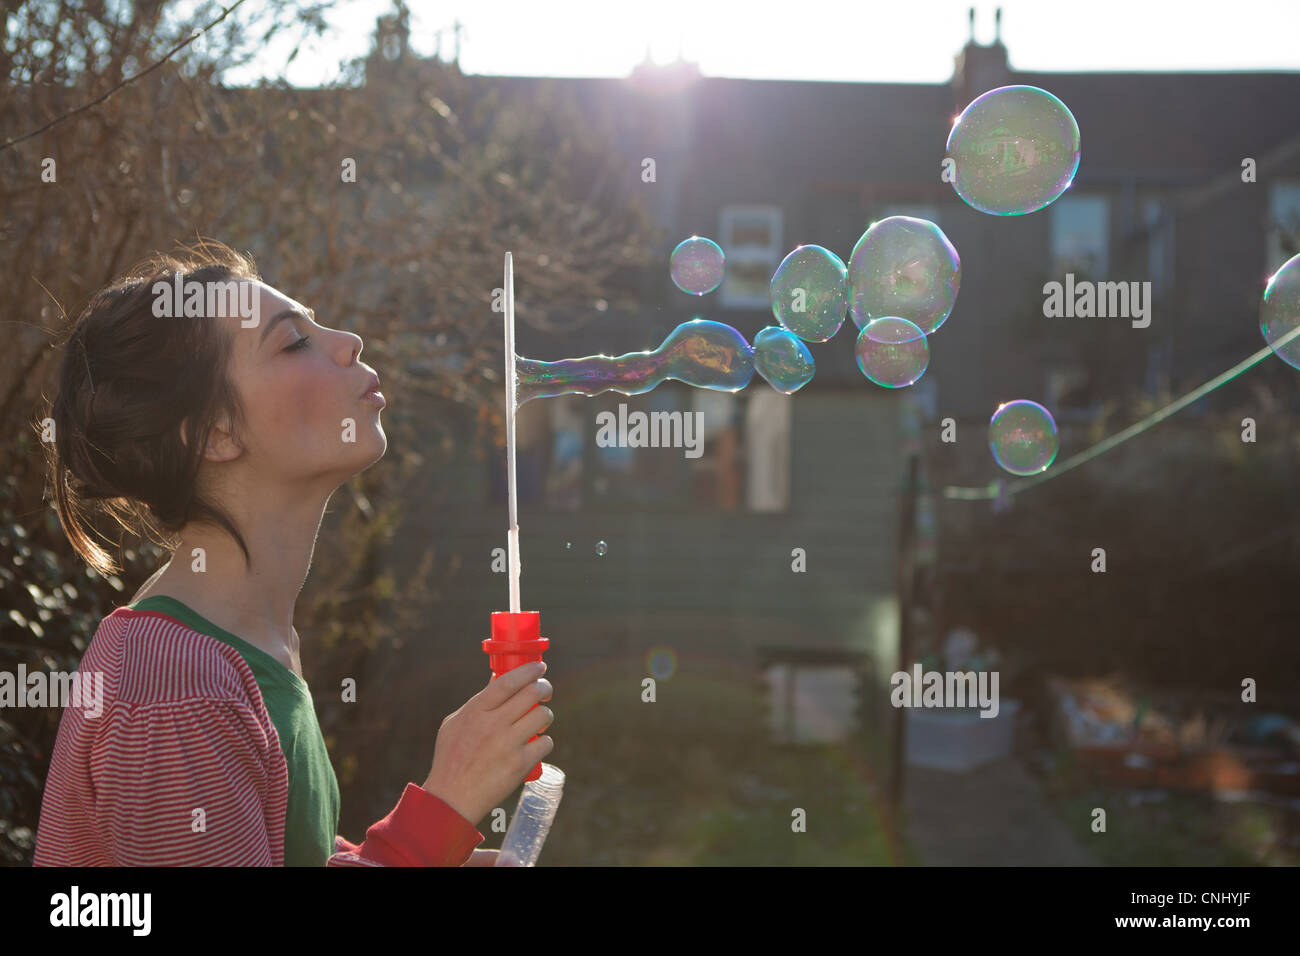 Young woman blowing bubbles outdoors Stock Photo